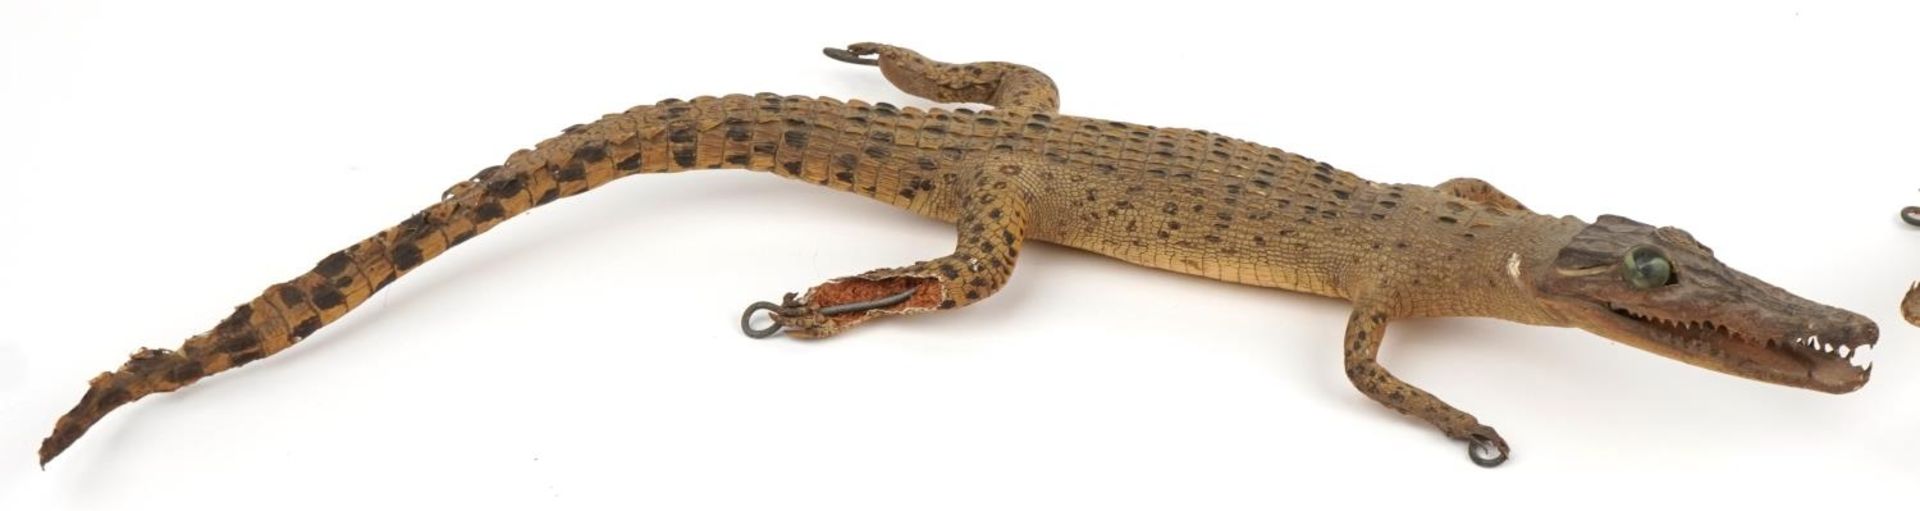 Two taxidermy interest baby crocodiles, each approximately 60cm in length : For further - Image 2 of 7